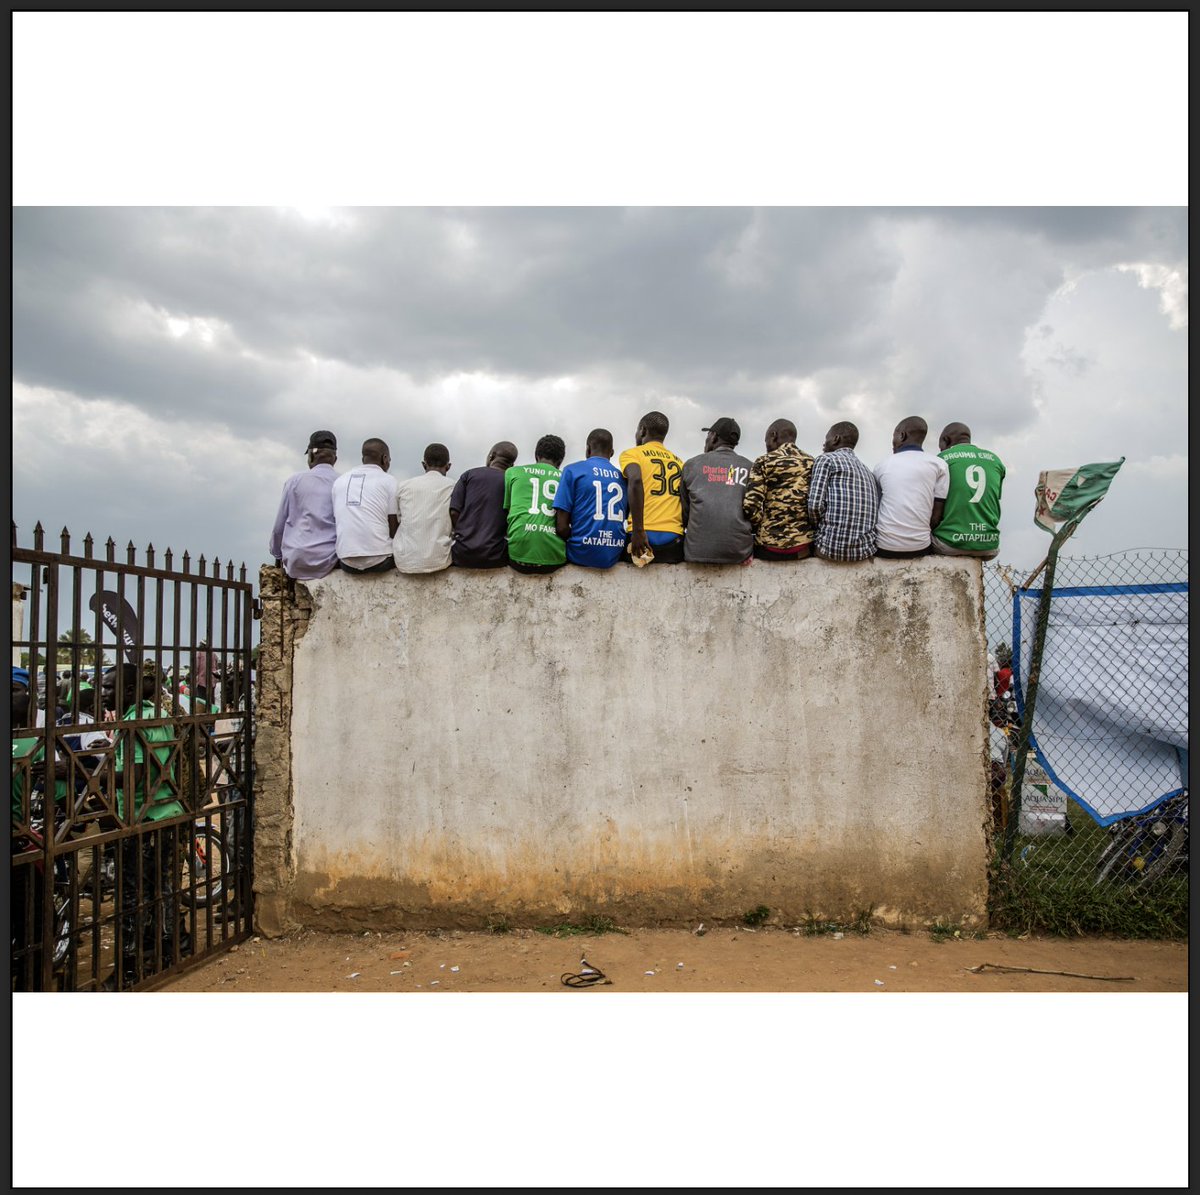 'Onduparaka Football club fans sit on a fence to get a better view of the match during a Uganda Premier League tournament.' 📸 by @EstherR_Mbabazi 

Buy this print here as part of Light of Day: A Print Sale by The Everyday Projects: everydayprojects.org/print-sale/est…